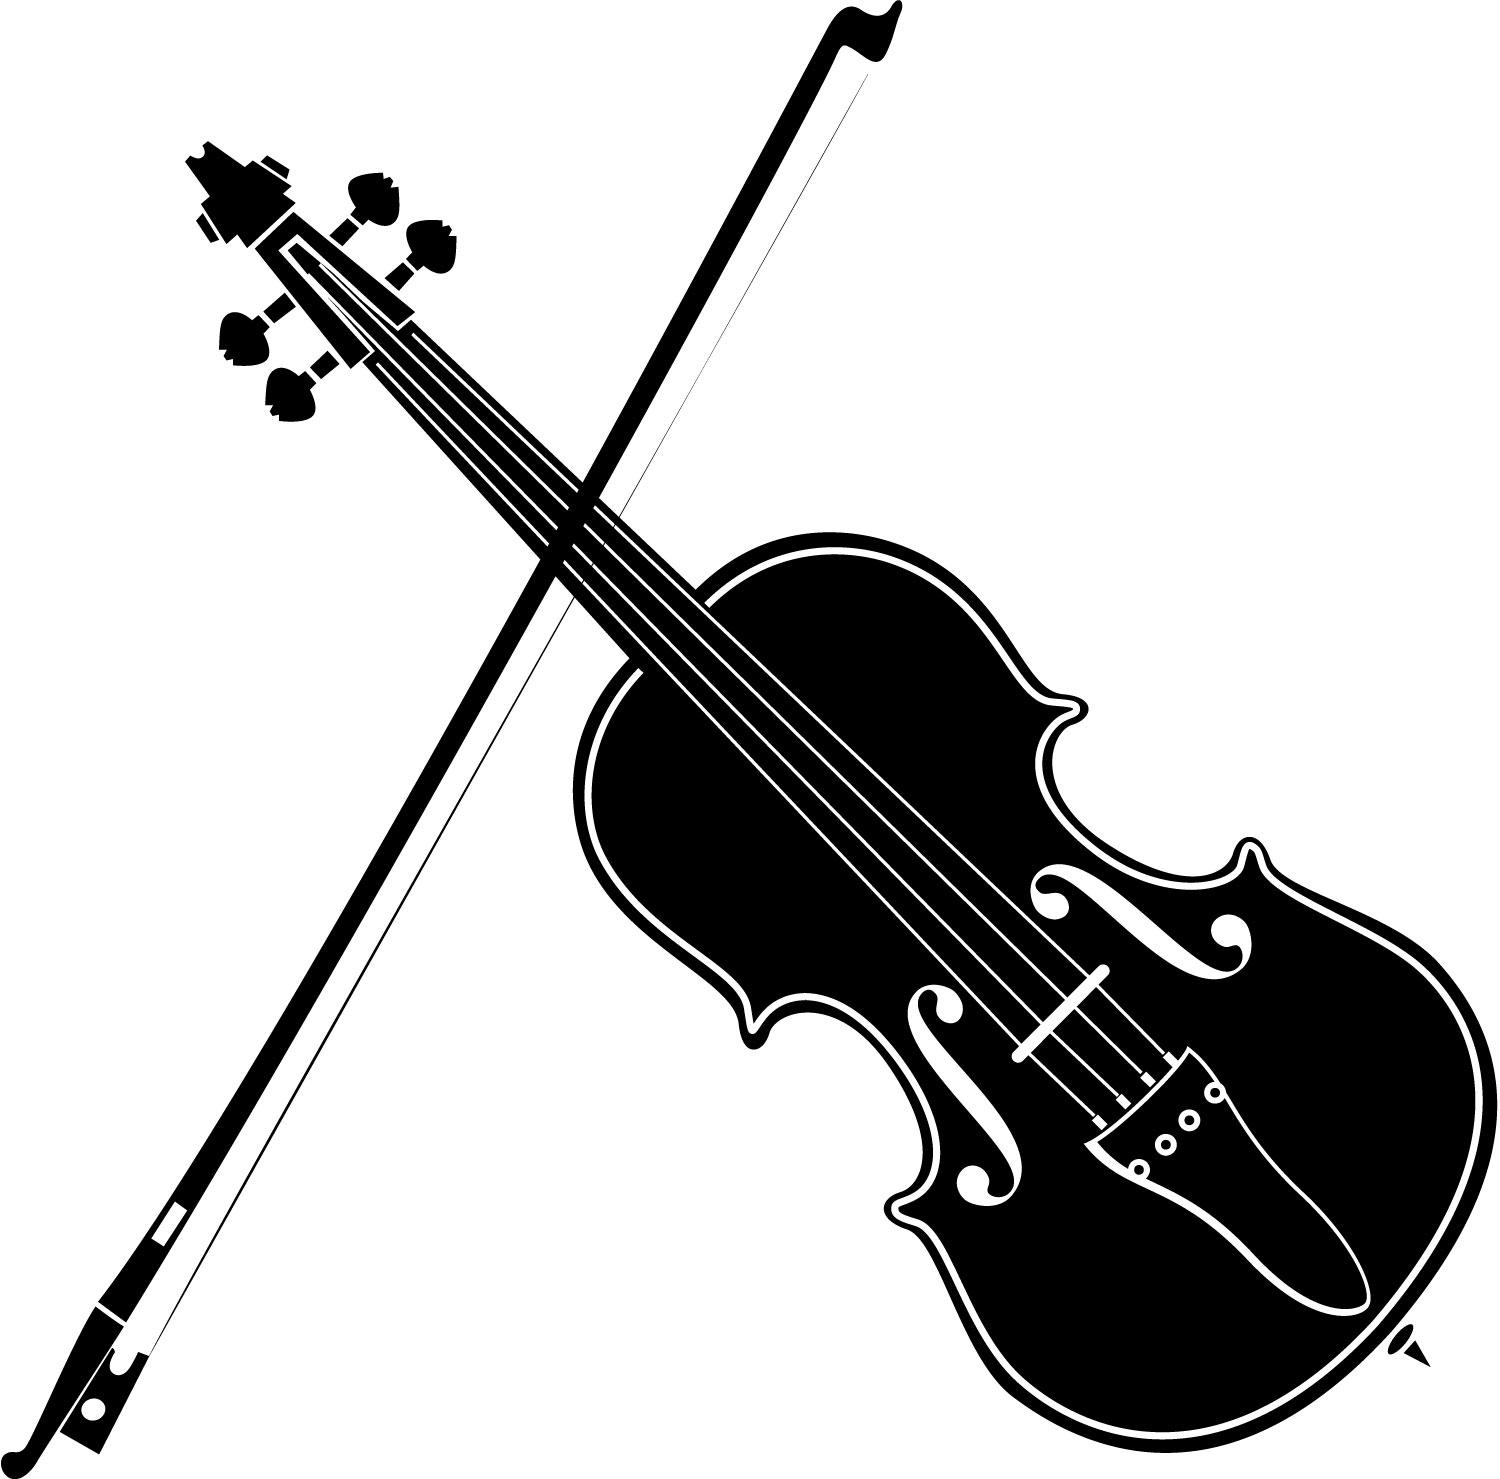 ... Fiddle Silhouette - A typ